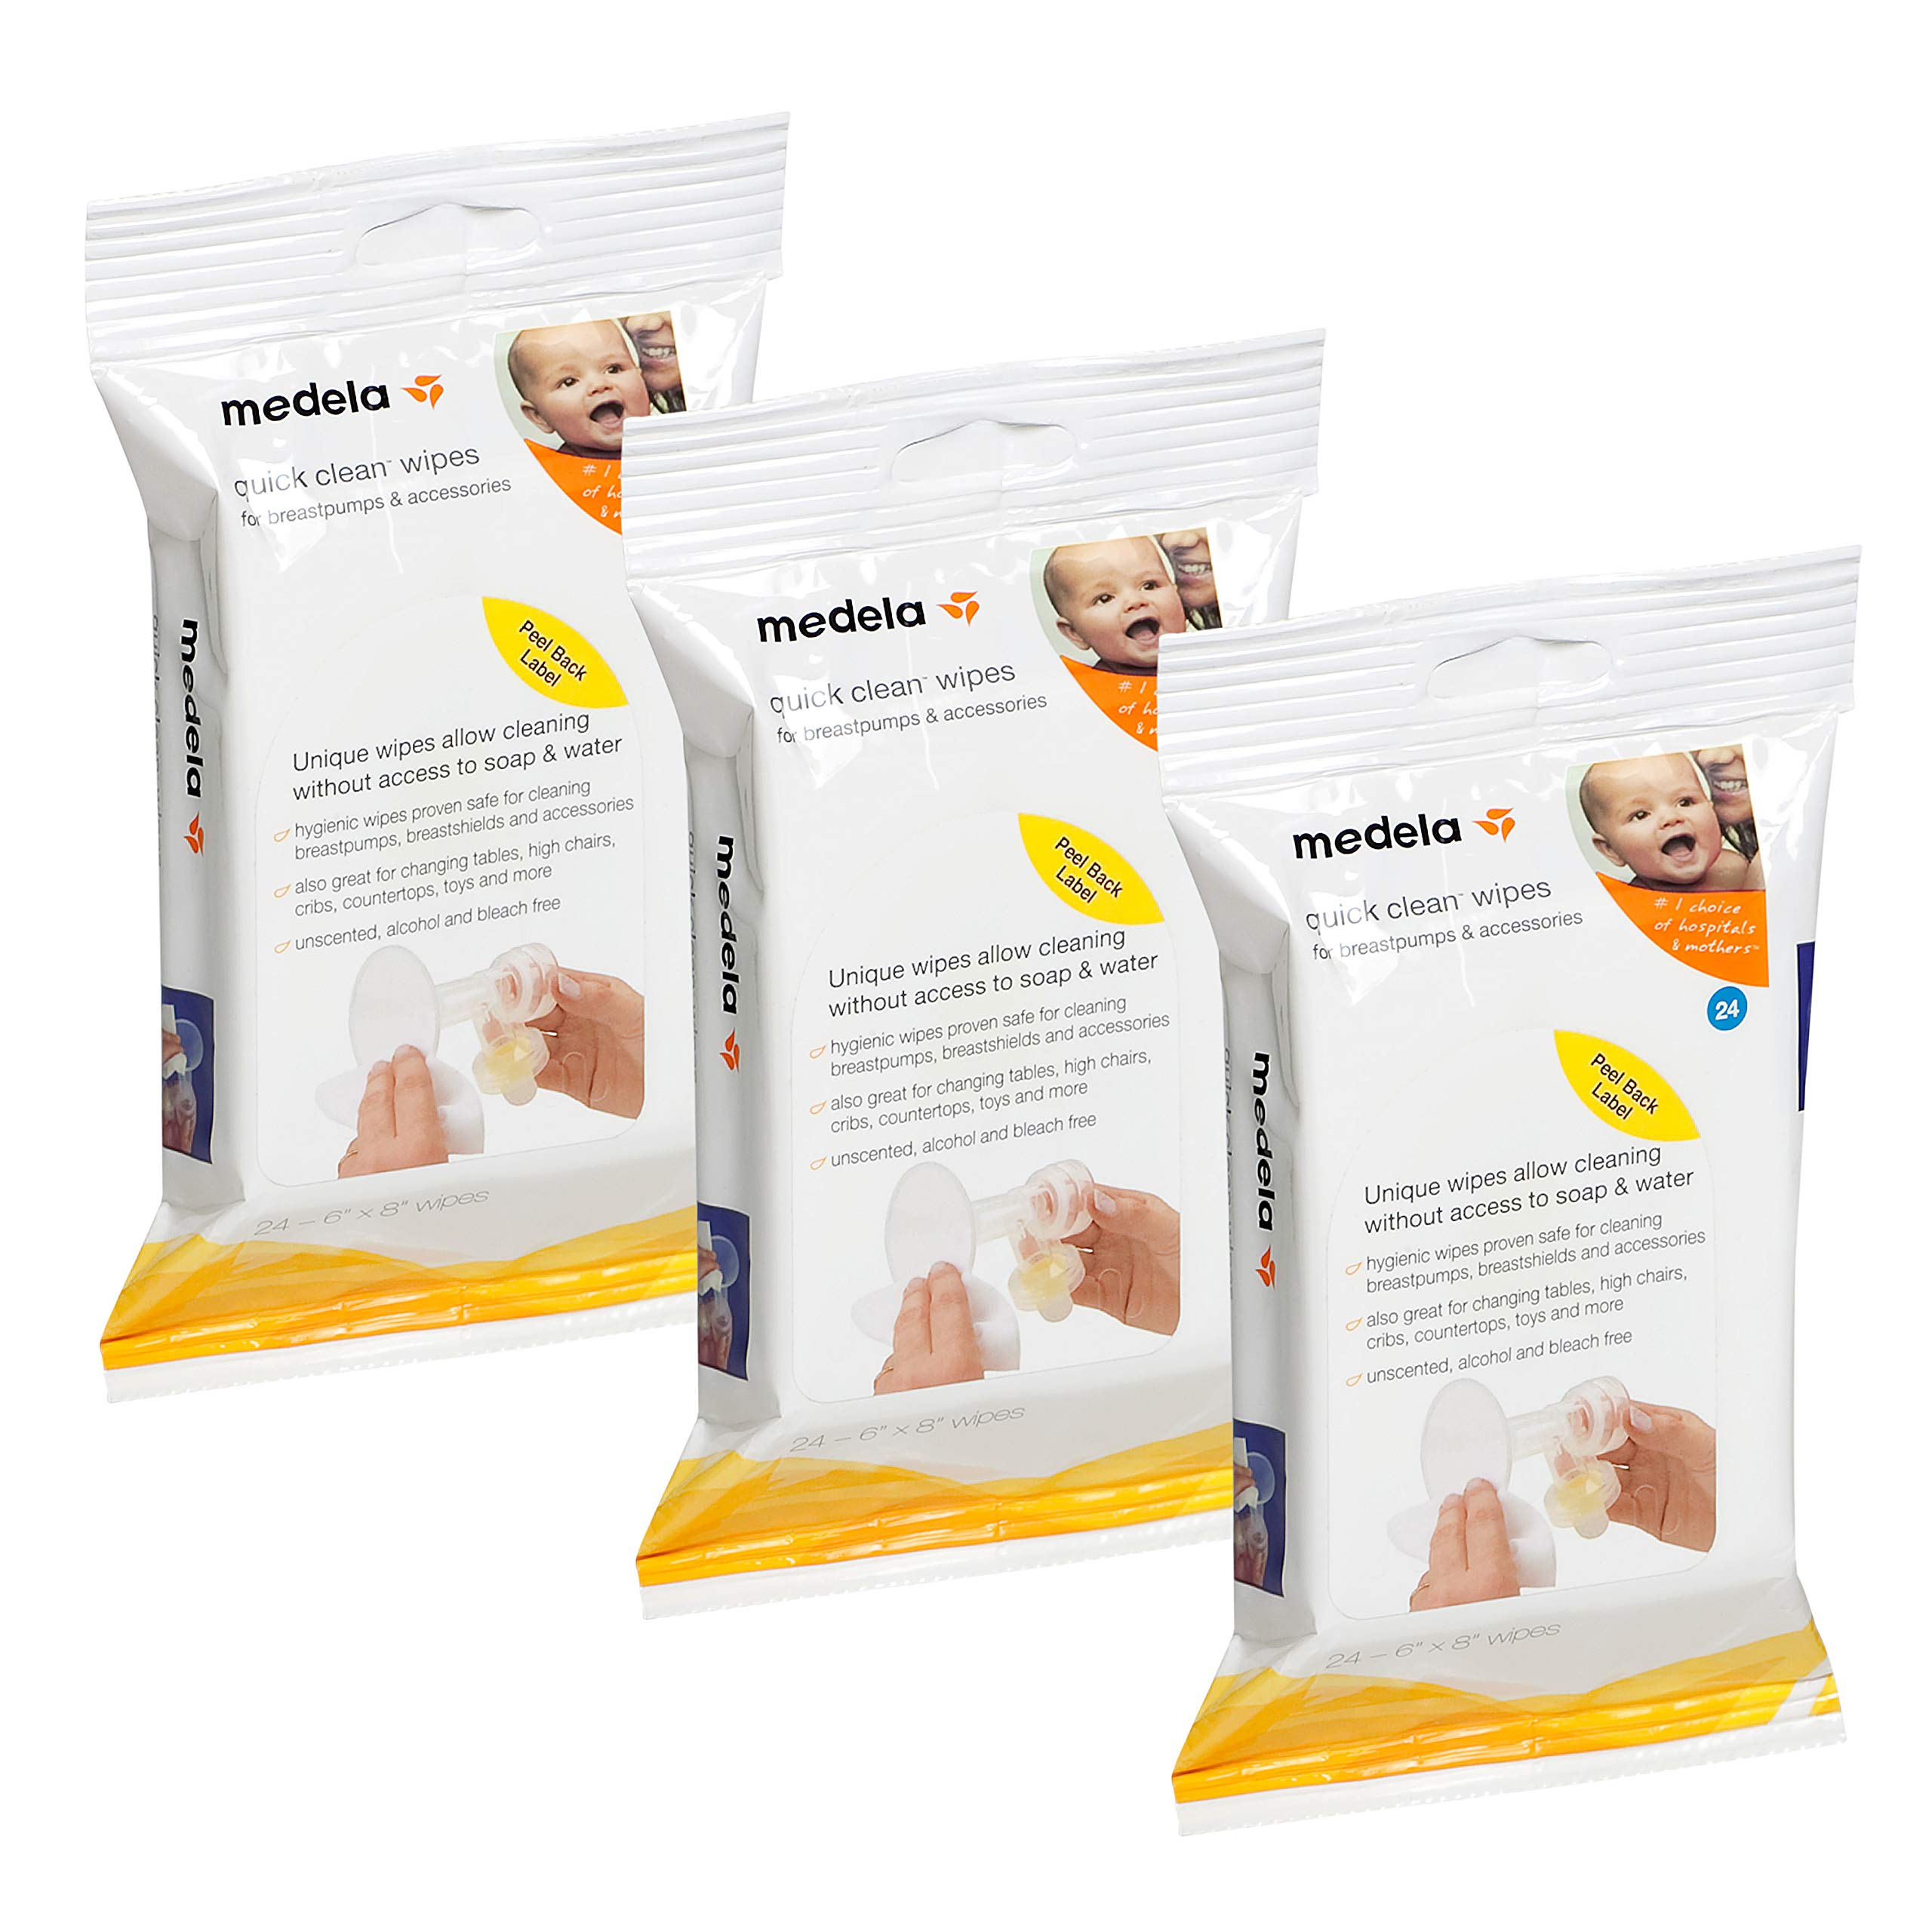 Medela Quick Clean Breast Pump and Accessory Wipes, 72 Wipes in a Resealable Pack, Convenient Portable Cleaning, Hygienic Wipes Safe for Cleaning High Chairs, Tables, Cribs and Countertops